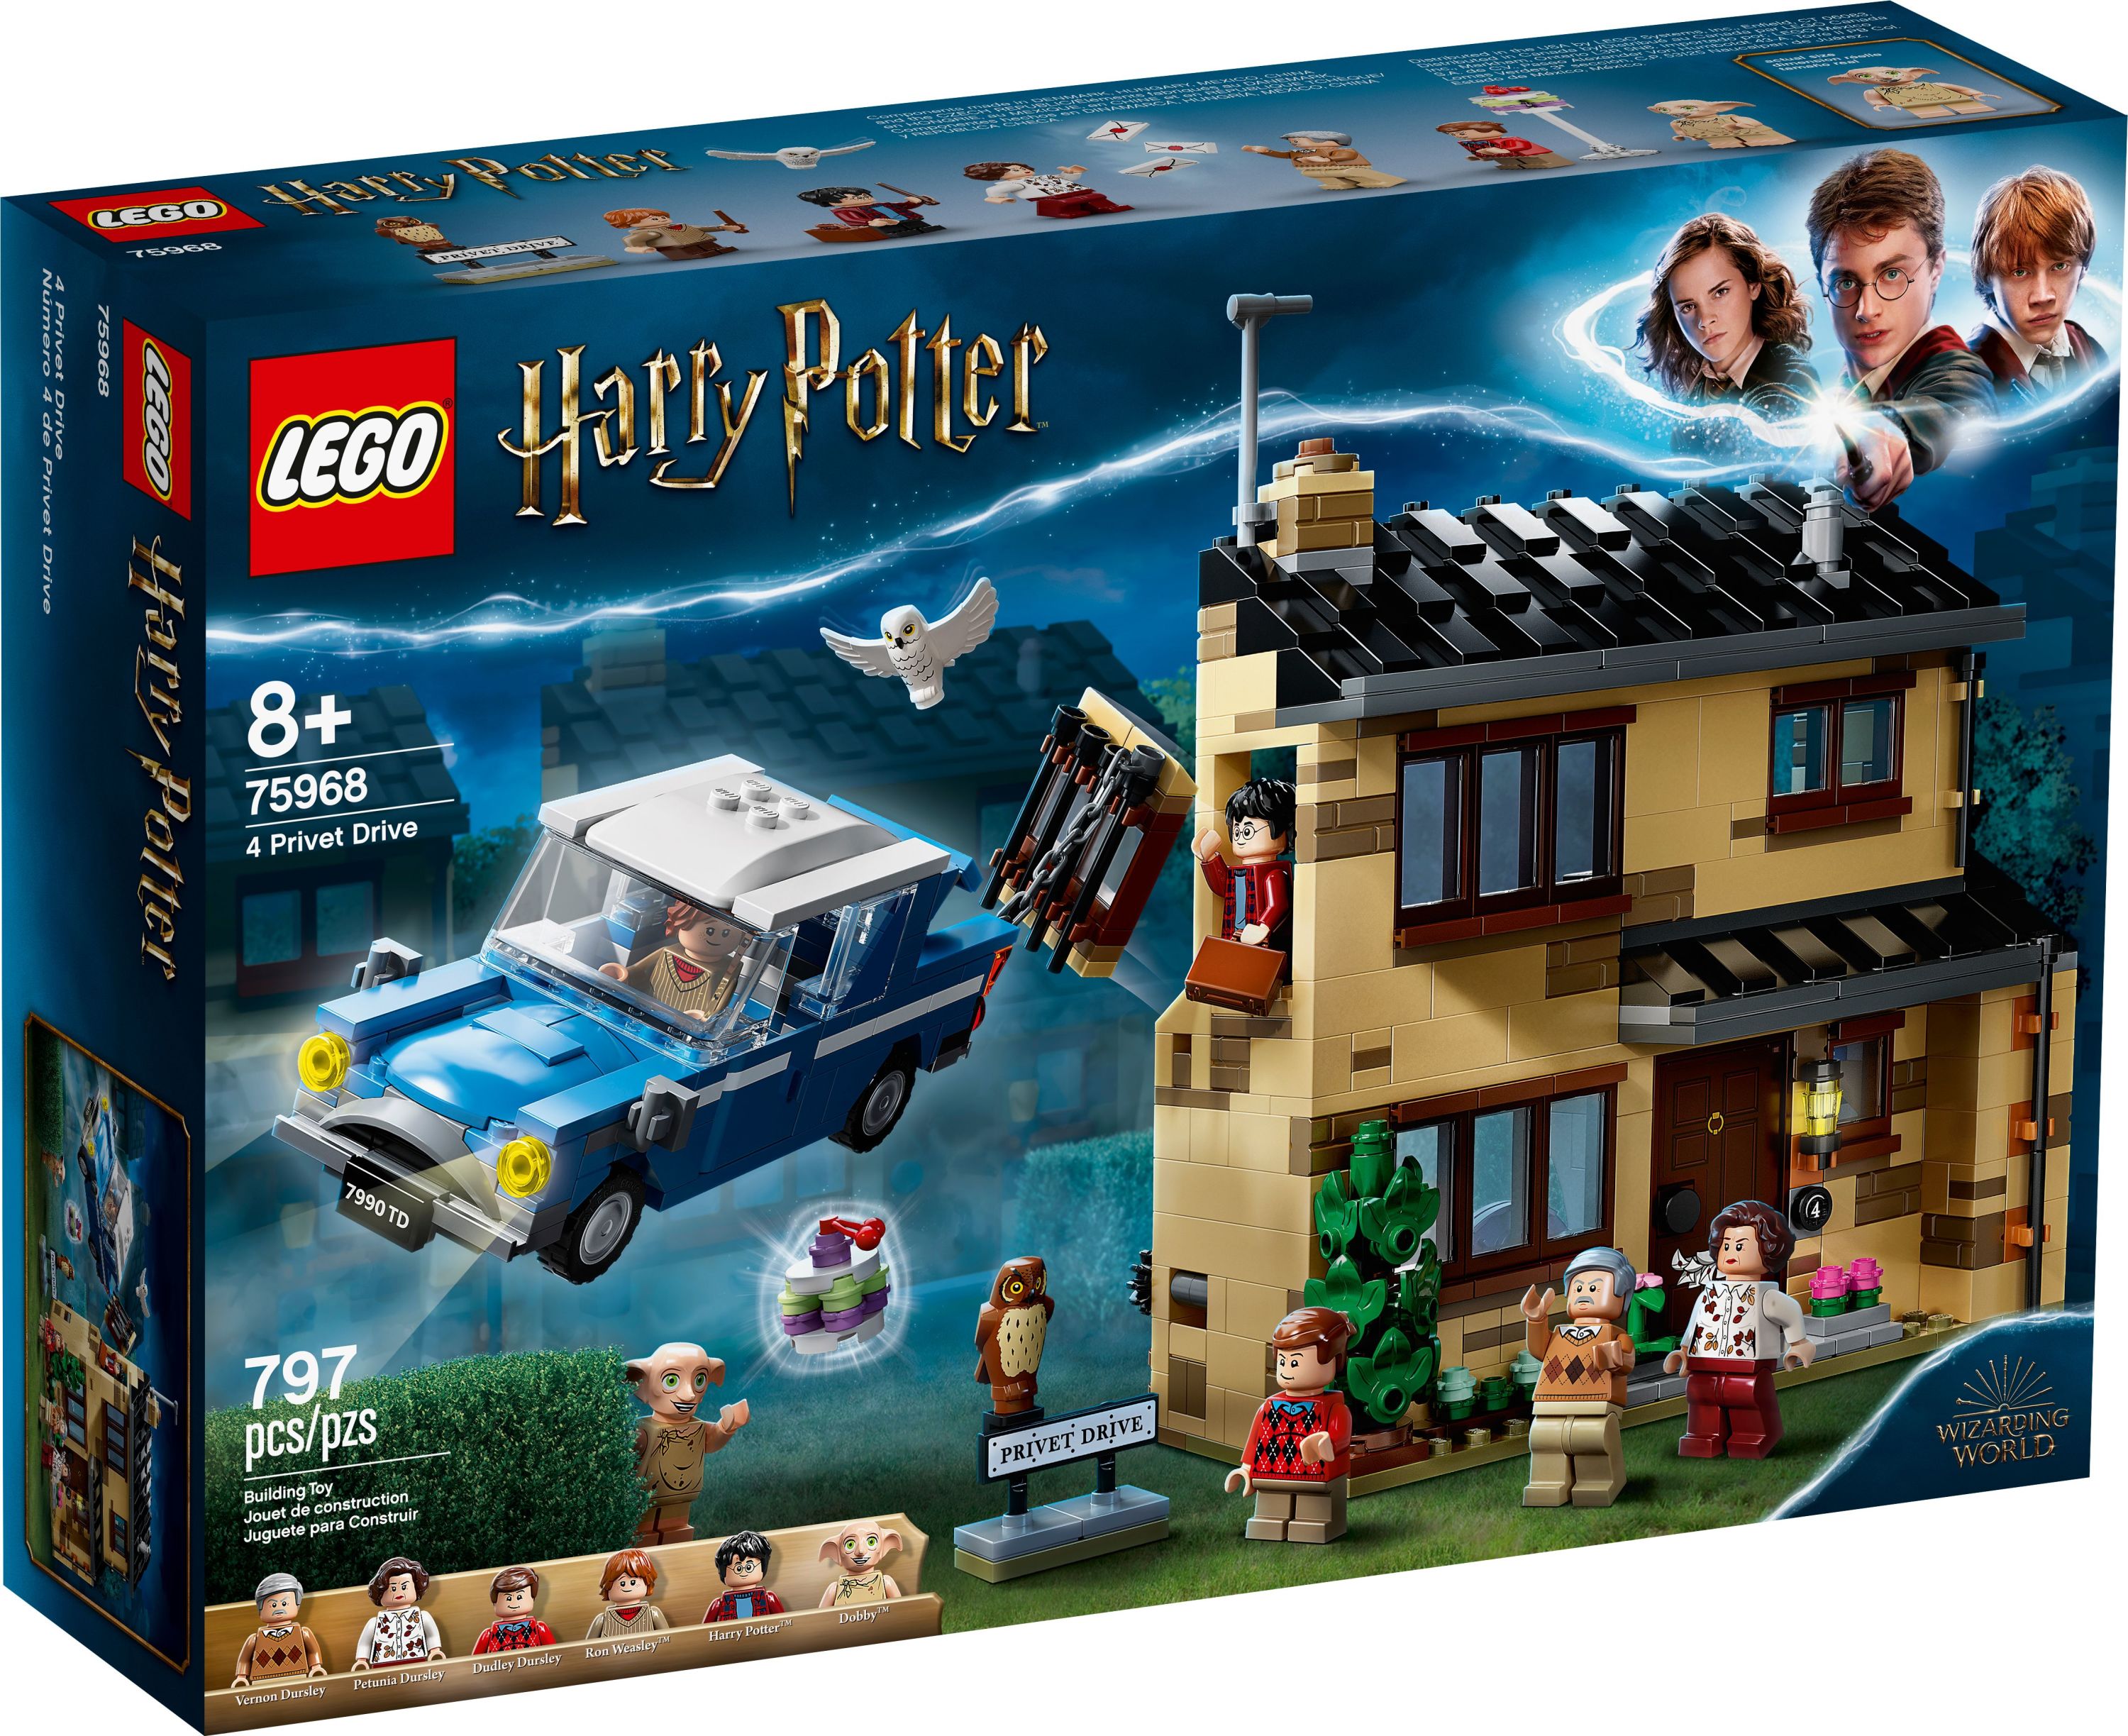 LEGO Harry Potter 4 Privet Drive 75968 House and Ford Anglia Flying Car Toy, Wizarding World Gifts for Kids, Girls & Boys with Harry Potter, Ron Weasley, Dursley Family, and Dobby Minifigures - image 3 of 3